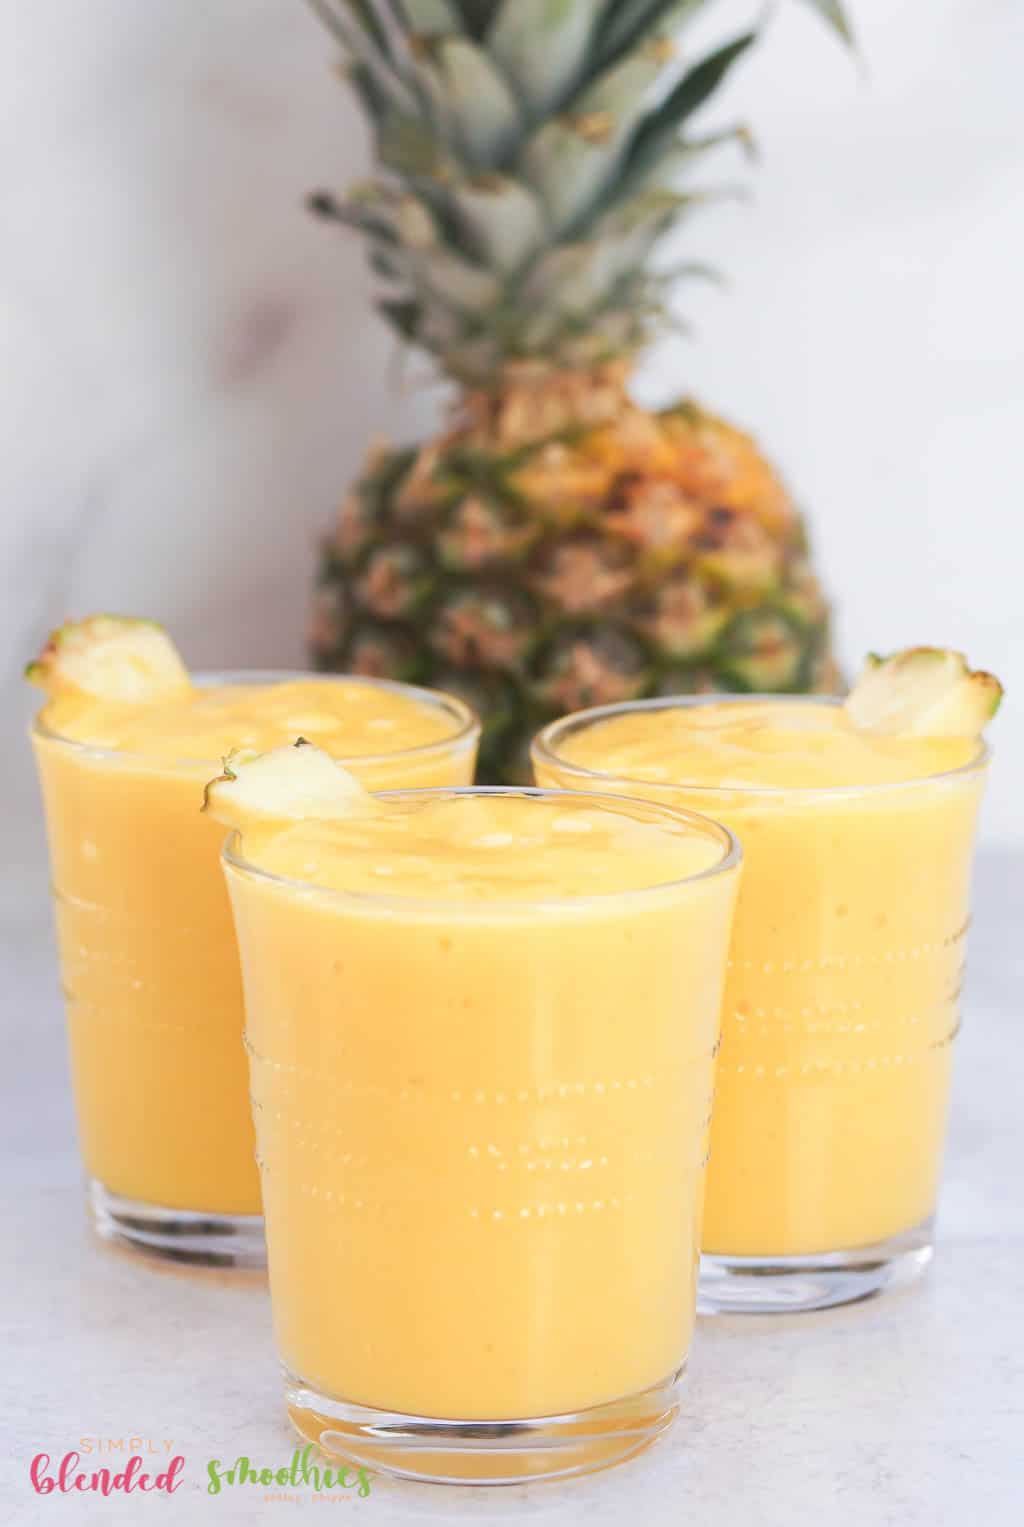 Mango Pineapple Smoothie With Pineapple In Background